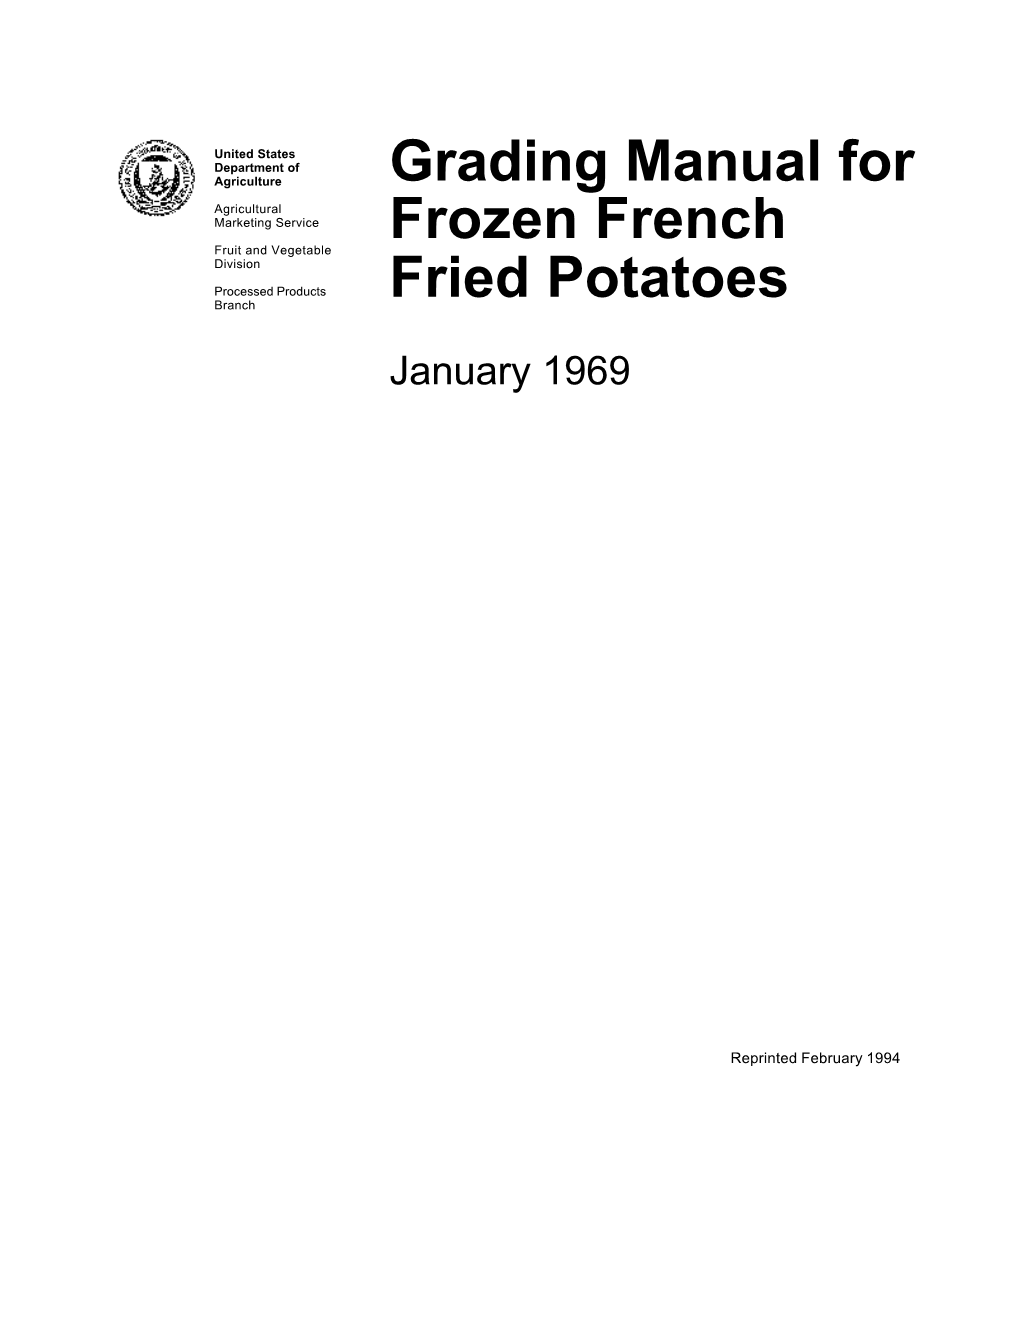 Grading Manual for Frozen French Fried Potatoes